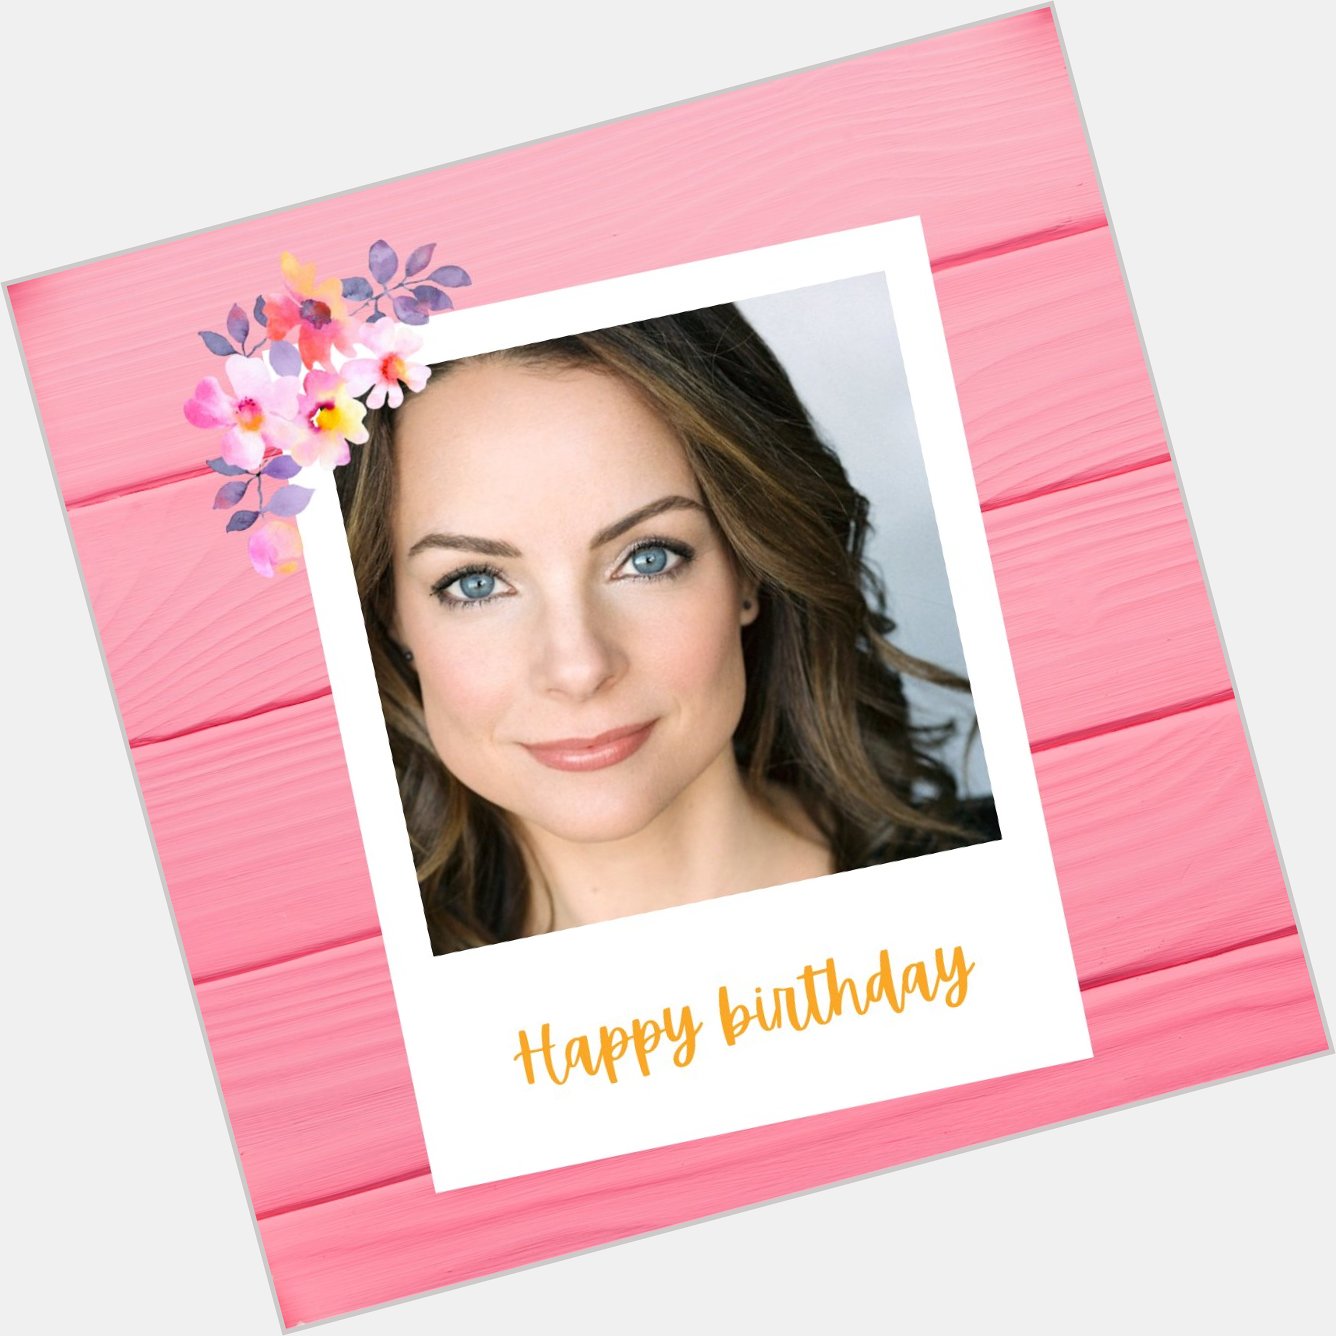 Happy Birthday to our beautiful friend Kimberly Williams-Paisley! We hope you have a wonderful day/week/month/year! 